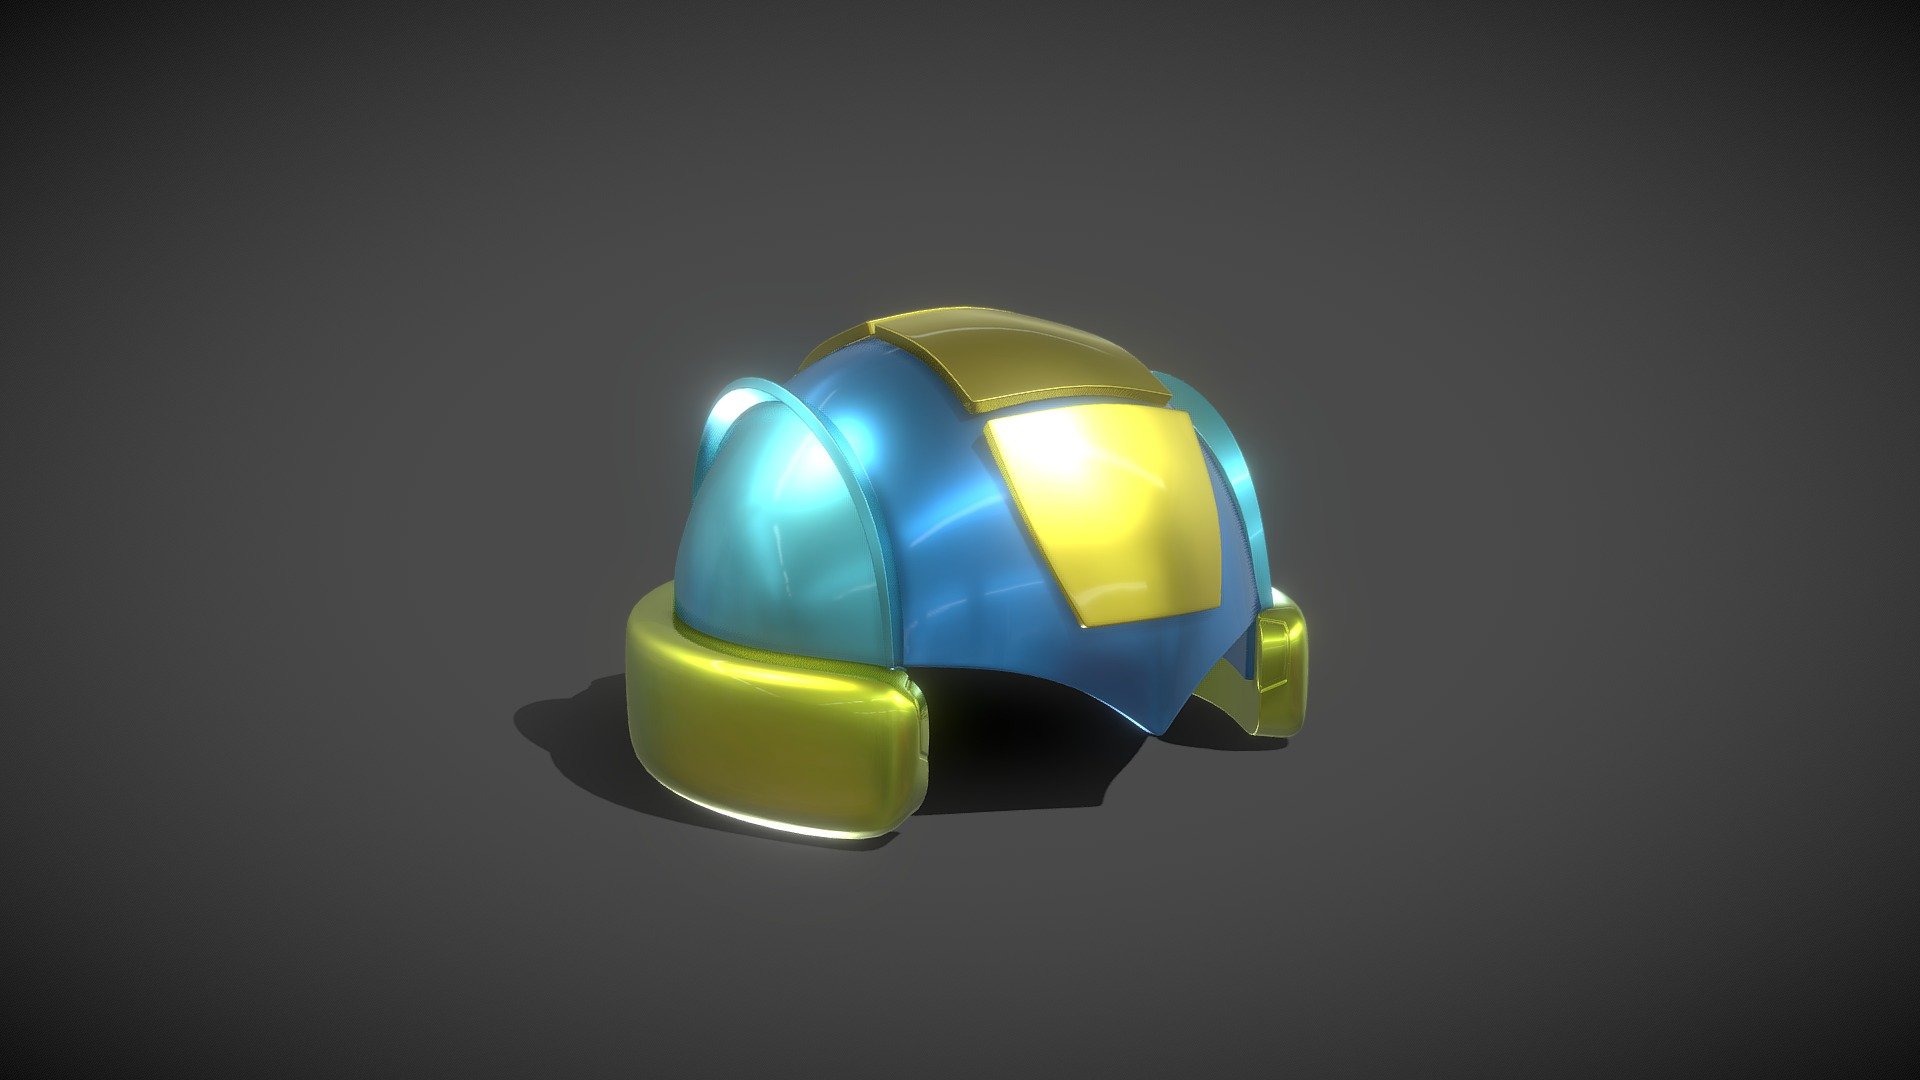 Cartoon Robot Helmet Model CRH7 modeled in 3Ds Max 2017 and rendered in Vray 3.4.

3D Printable Model.

Scale Size upto 2 Inches.

Polys = 21376 and Verts = 21392 3d model